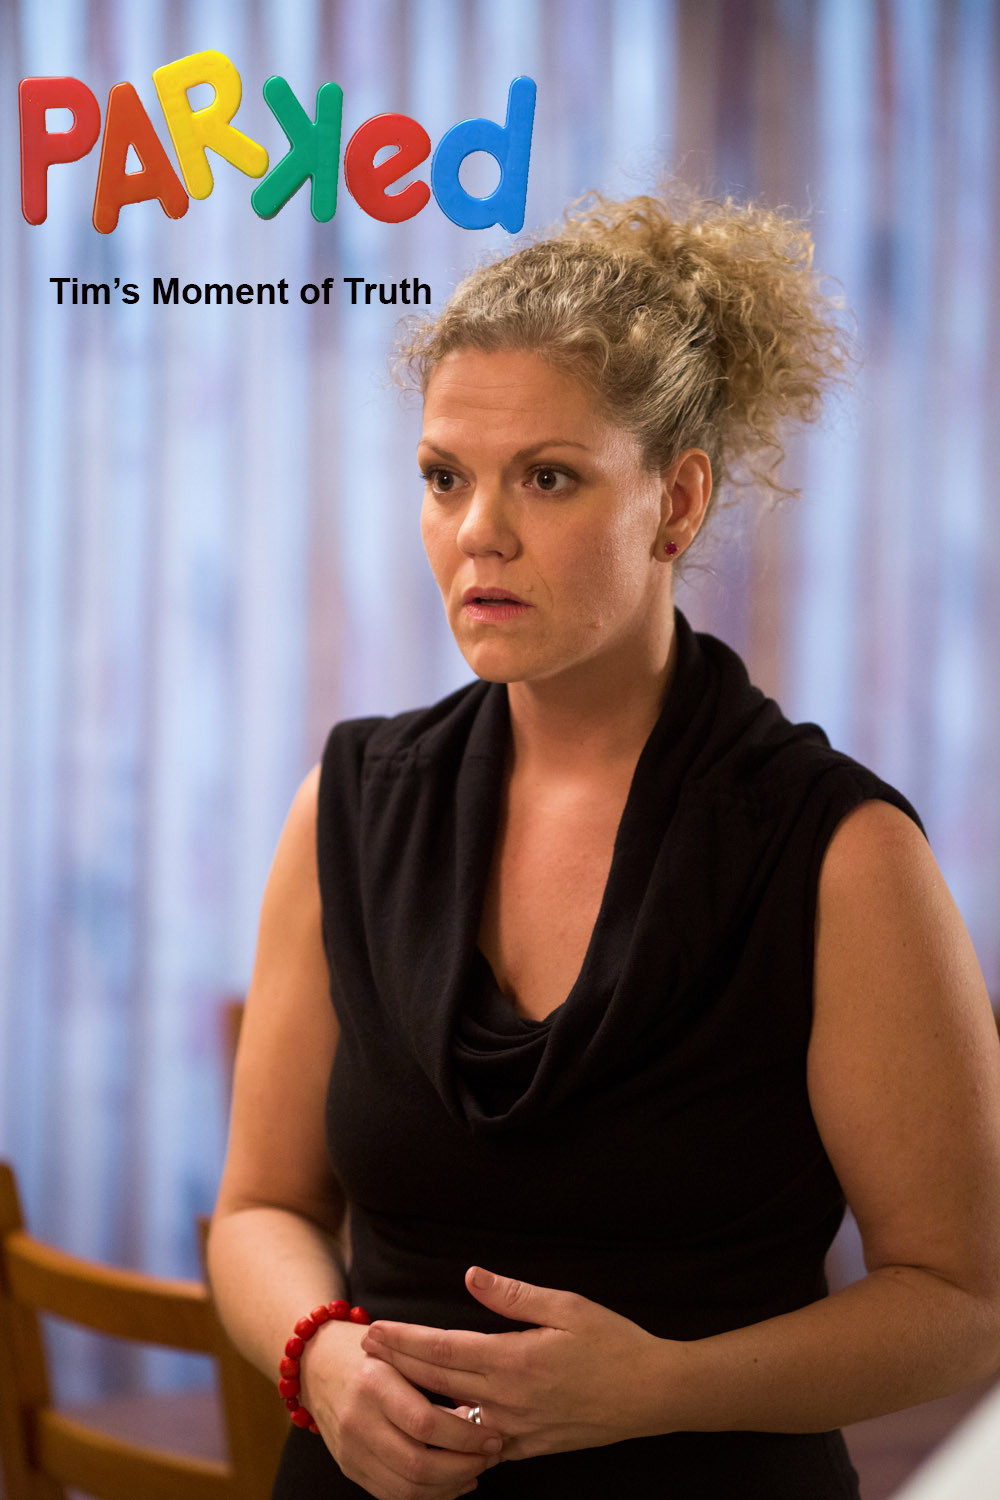 S. Siobhan McCarthy as Jenn in PARKED Episode Tim's Moment of Truth